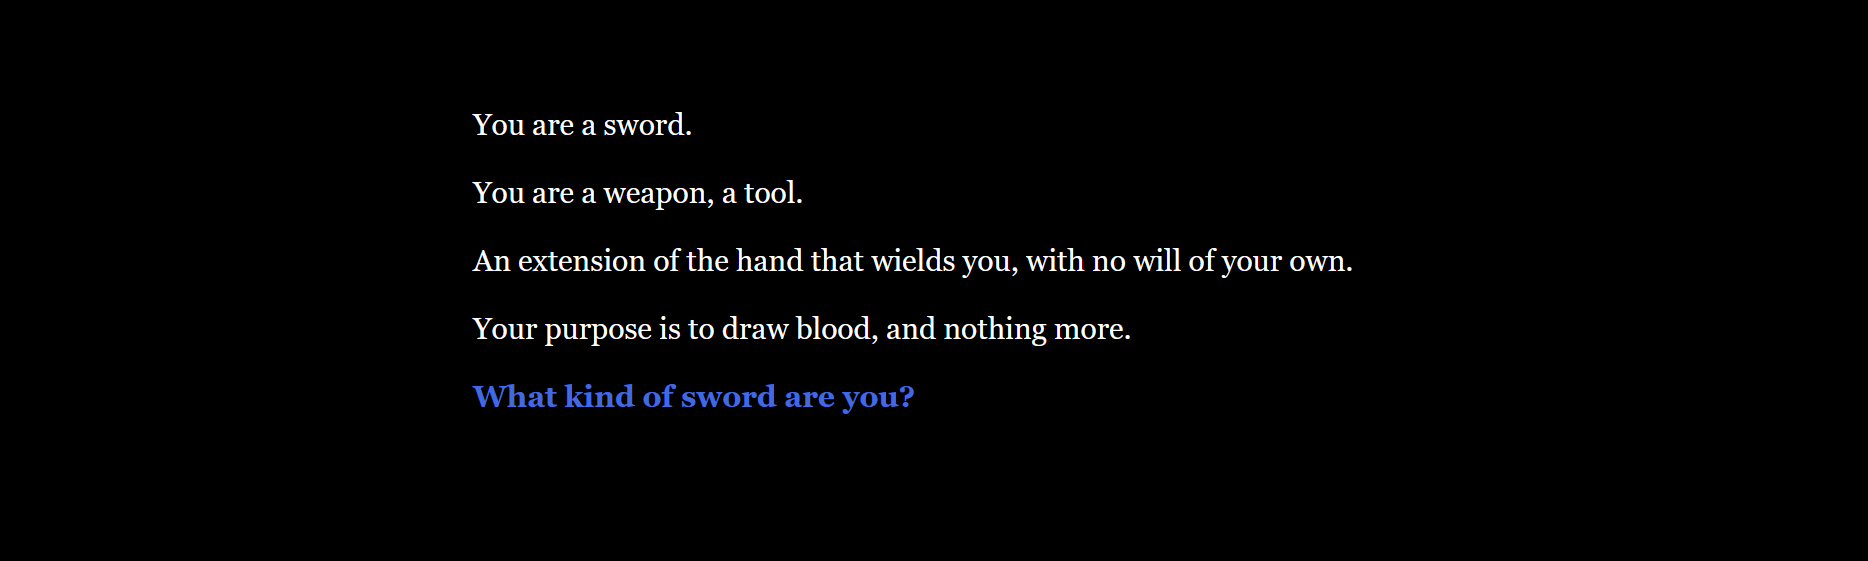 You are a sword. You are a weapon, a tool. An extension of the hand that wields you, with no will of your own. Your purpose is to draw blood, and nothing more. What kind of sword are you?